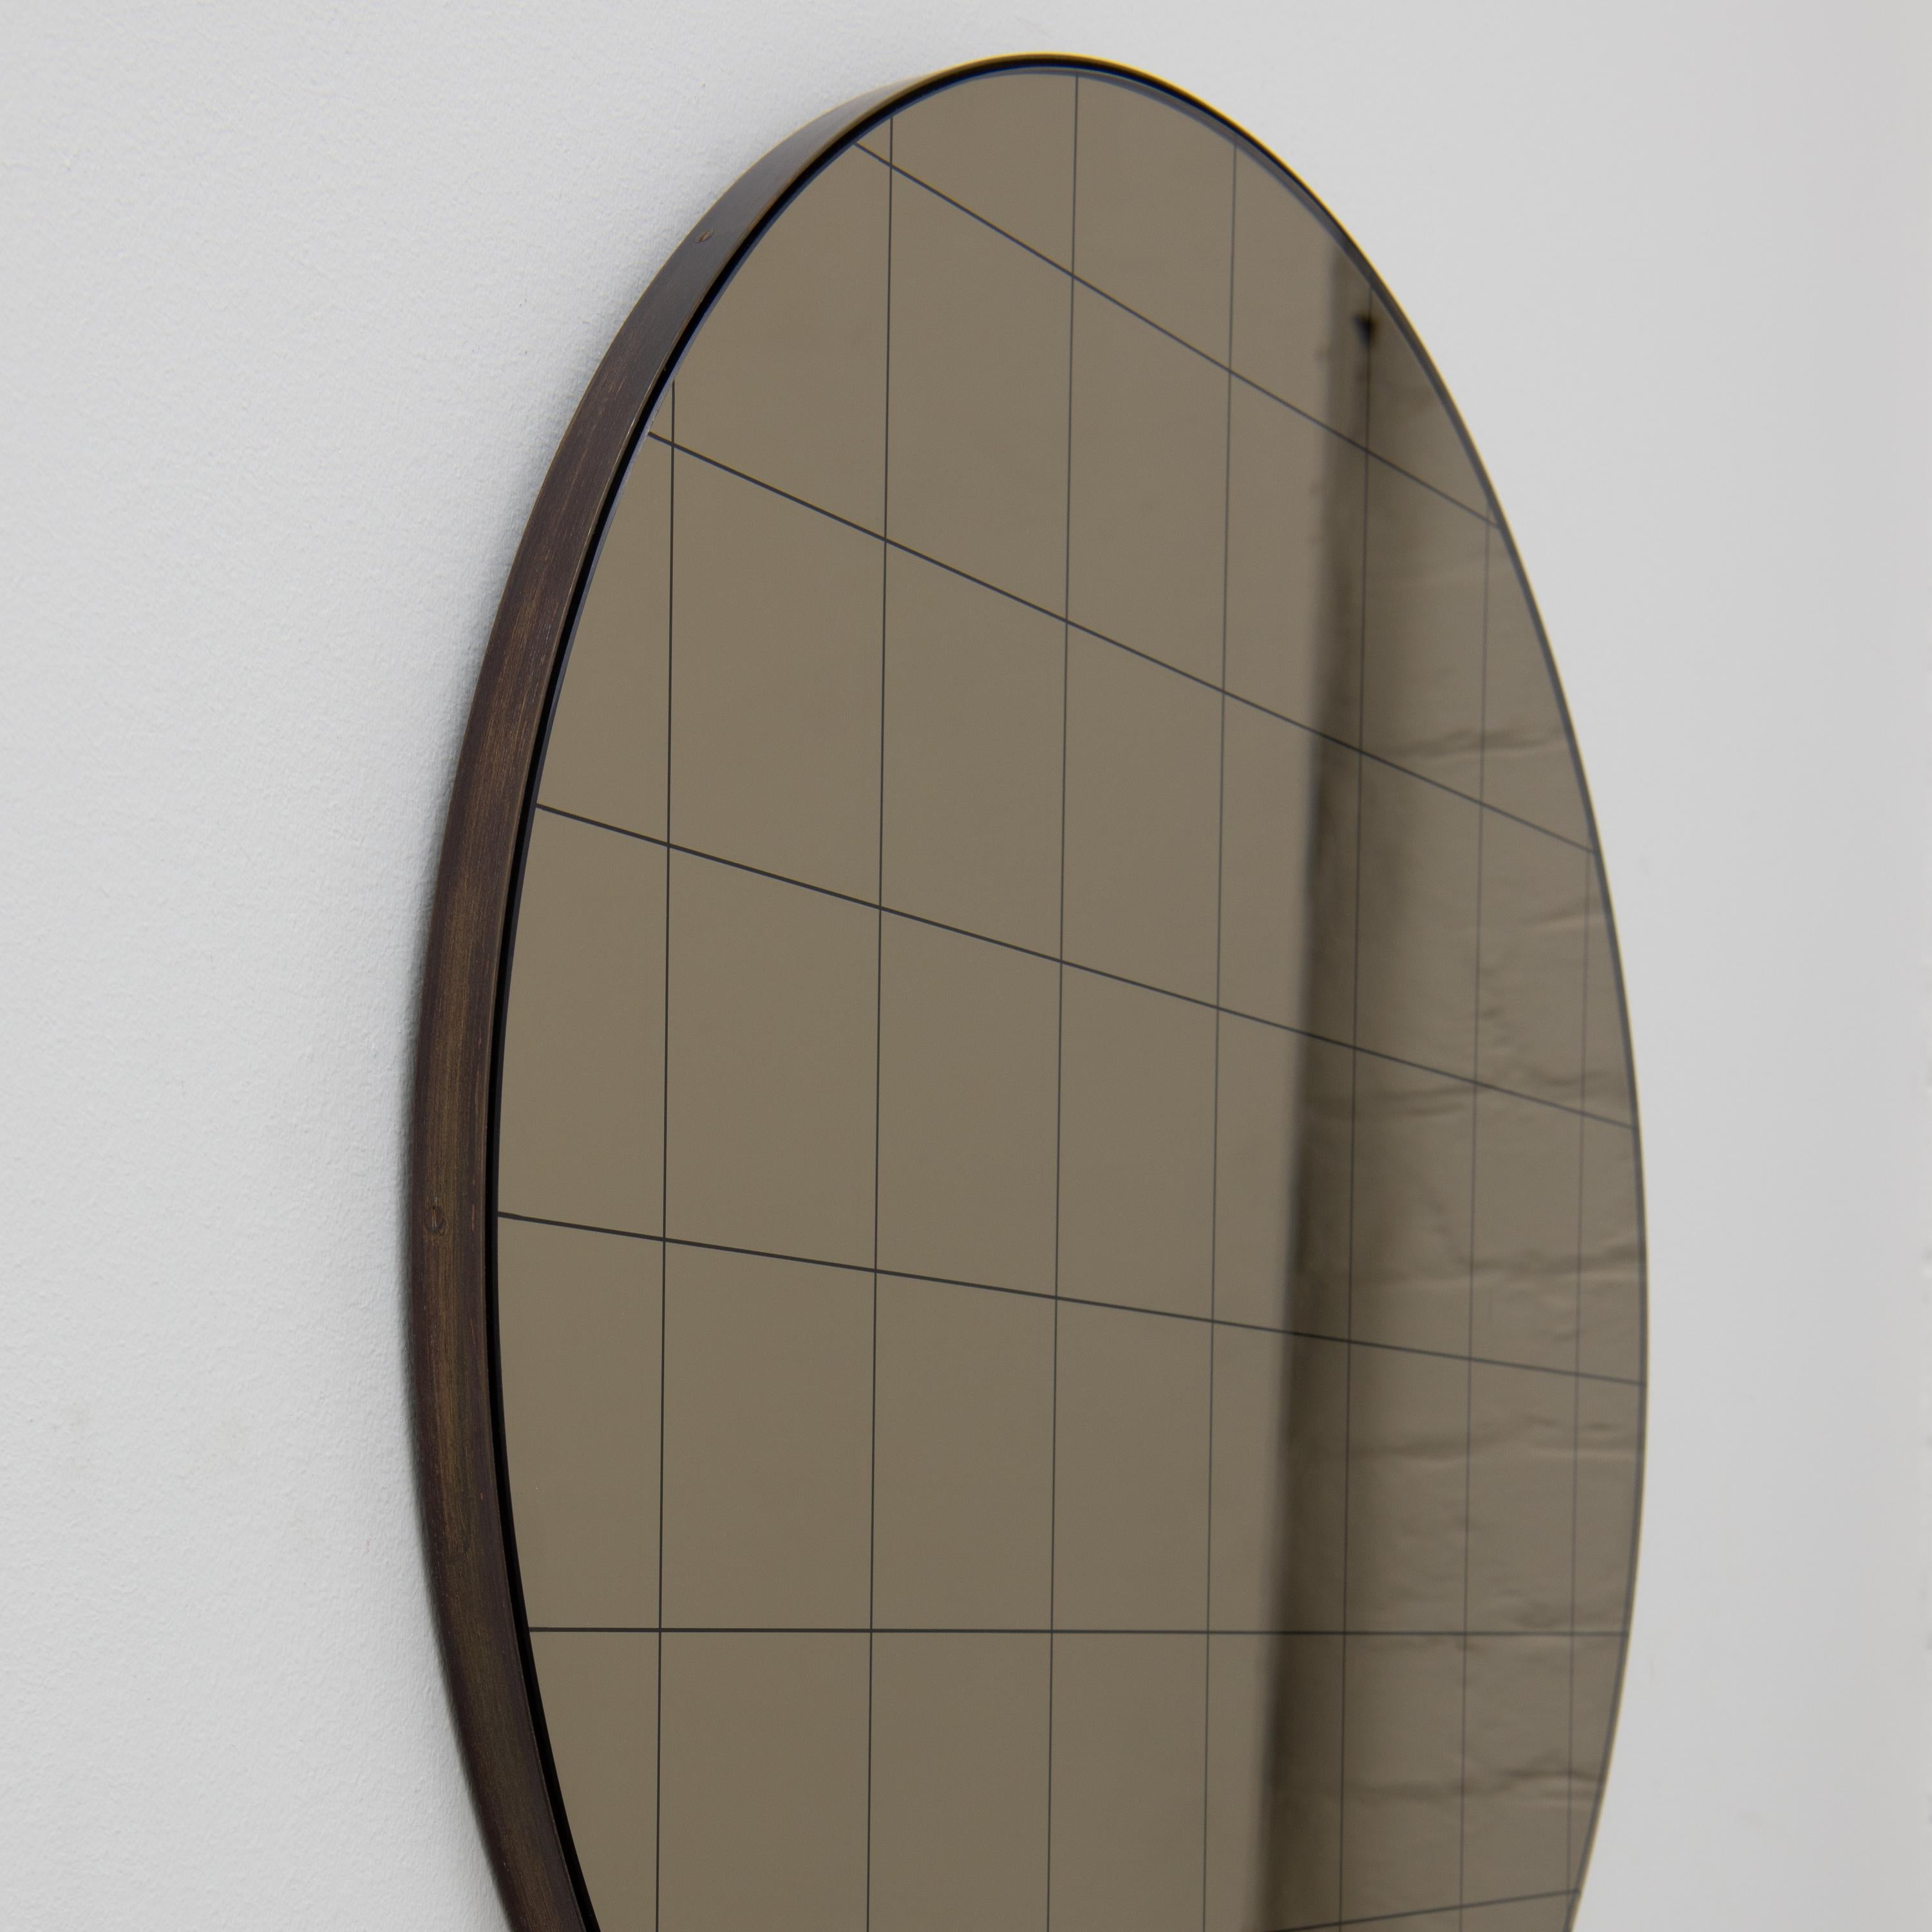 Modern round bronze mirror with an etched black grid and an elegant bronze patina brass frame. Designed and handcrafted in London, UK.

Medium, large and extra-large mirrors (60, 80 and 100cm) are fitted with an ingenious French cleat (split batten)